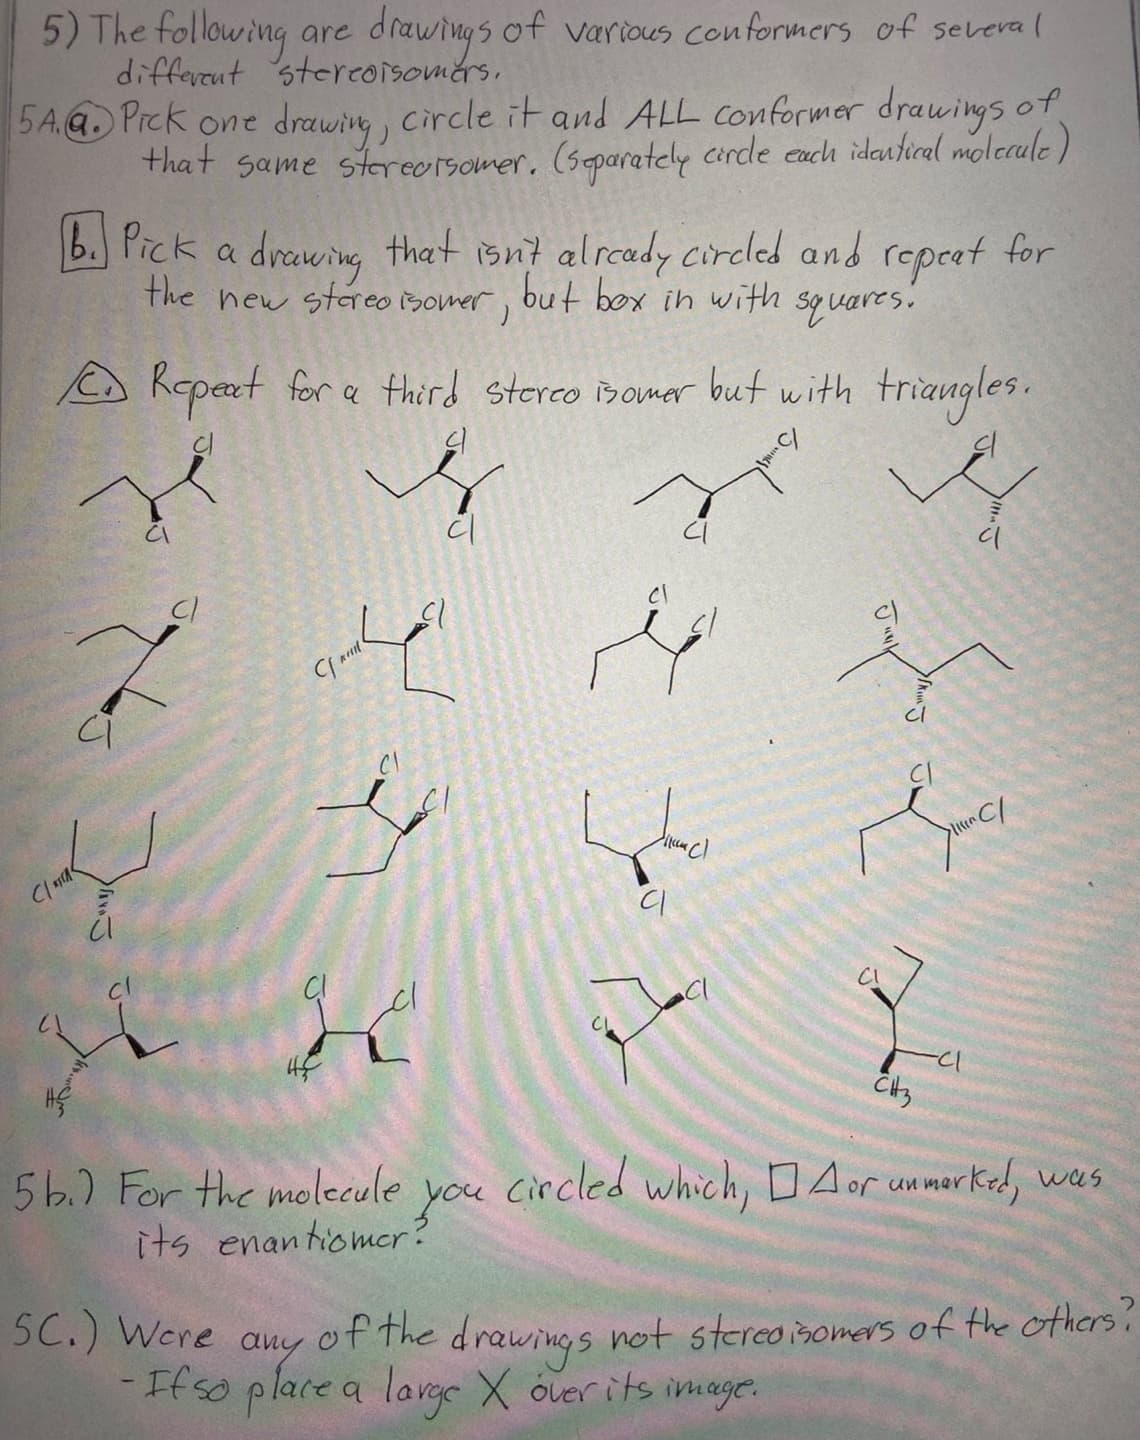 5) The following are drawings of various conformers of several
different stereoisomers.
5A.Q. Prck one drawing, circle it and ALL conformer drawings of
that same sterearsomer. (separately circle each identical molecule)
b. Pick a
drawing that isn't already circled and repeat for
the new stereoisomer, but box in with squares.
Repeat for a third stereo isomer but with triangles.
cl
je
7
ci
ody
C1 지대<
AveJ
Cl
38
HE
C
I
45
42
4
5b.) For the molecule
its enantiomer?
you
ہو ماتم
(cu cl
CH3
C/
circled which, DA or unmerked, was
SC.) Were any of the drawings not stereoisomers of the others?
-If so place a large X over its image.